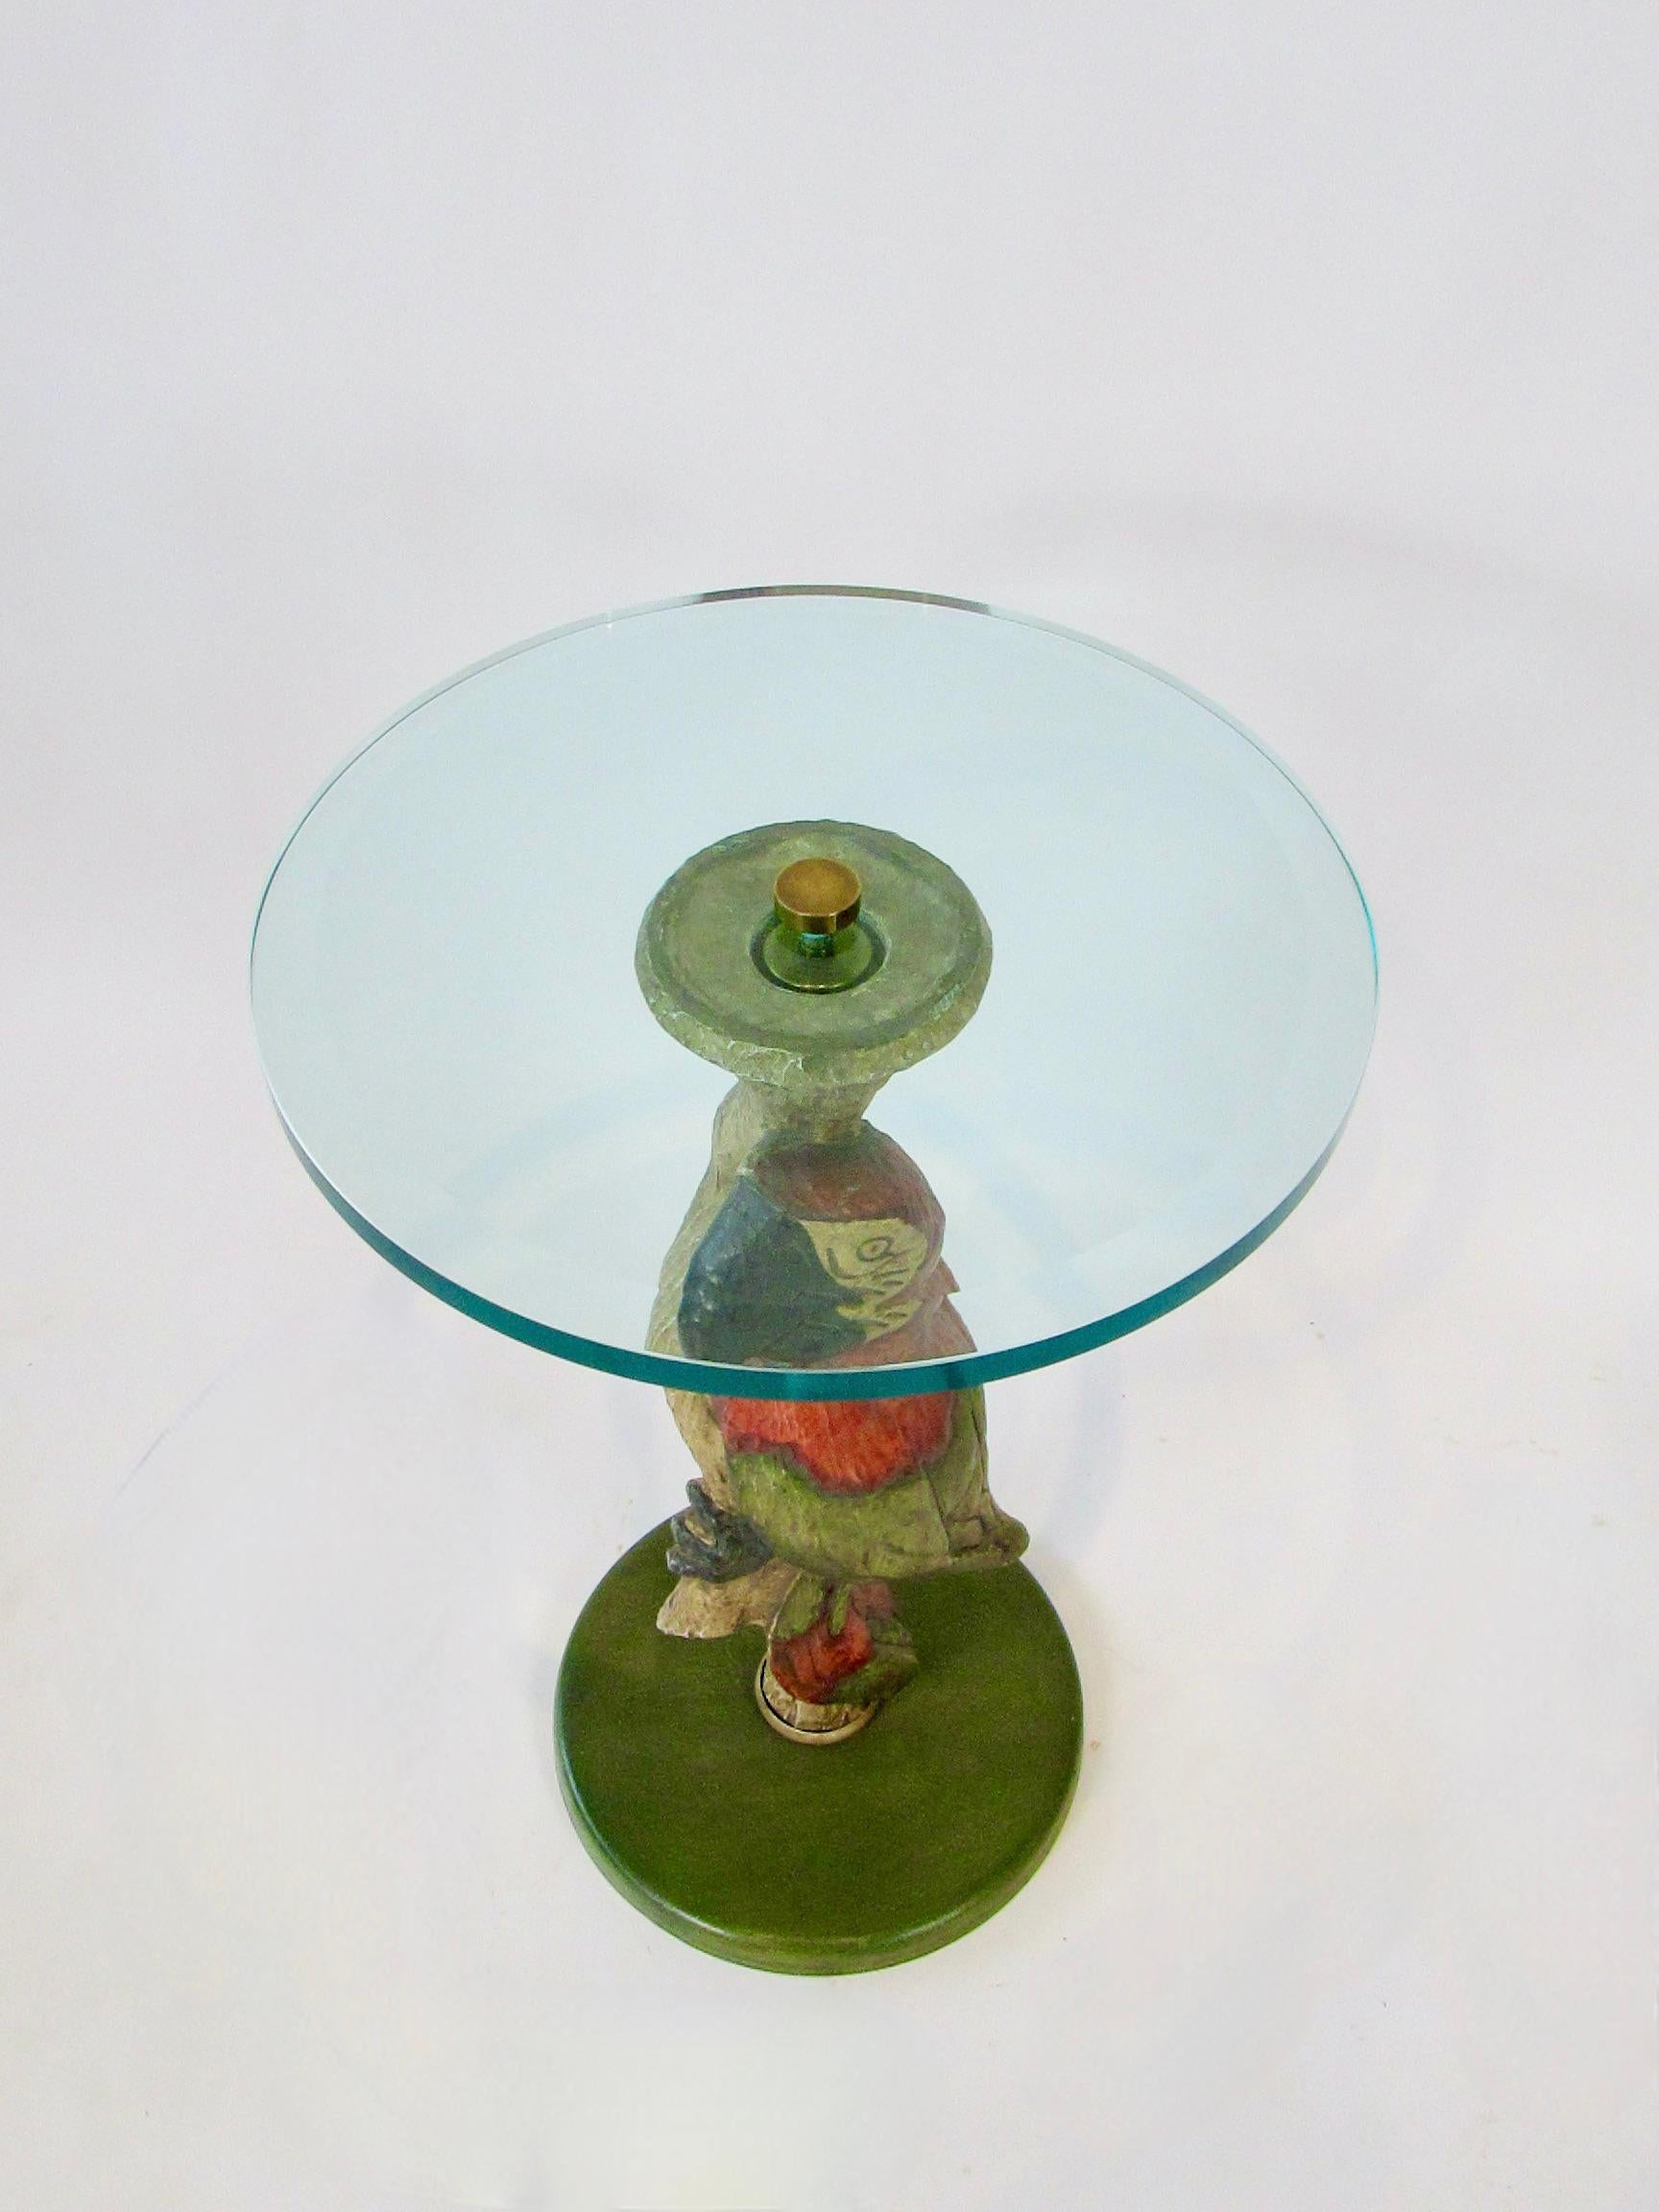 Whimsical Polly Want a Table Bevel Glass on Parrot Base Style of Maitland Smith For Sale 5